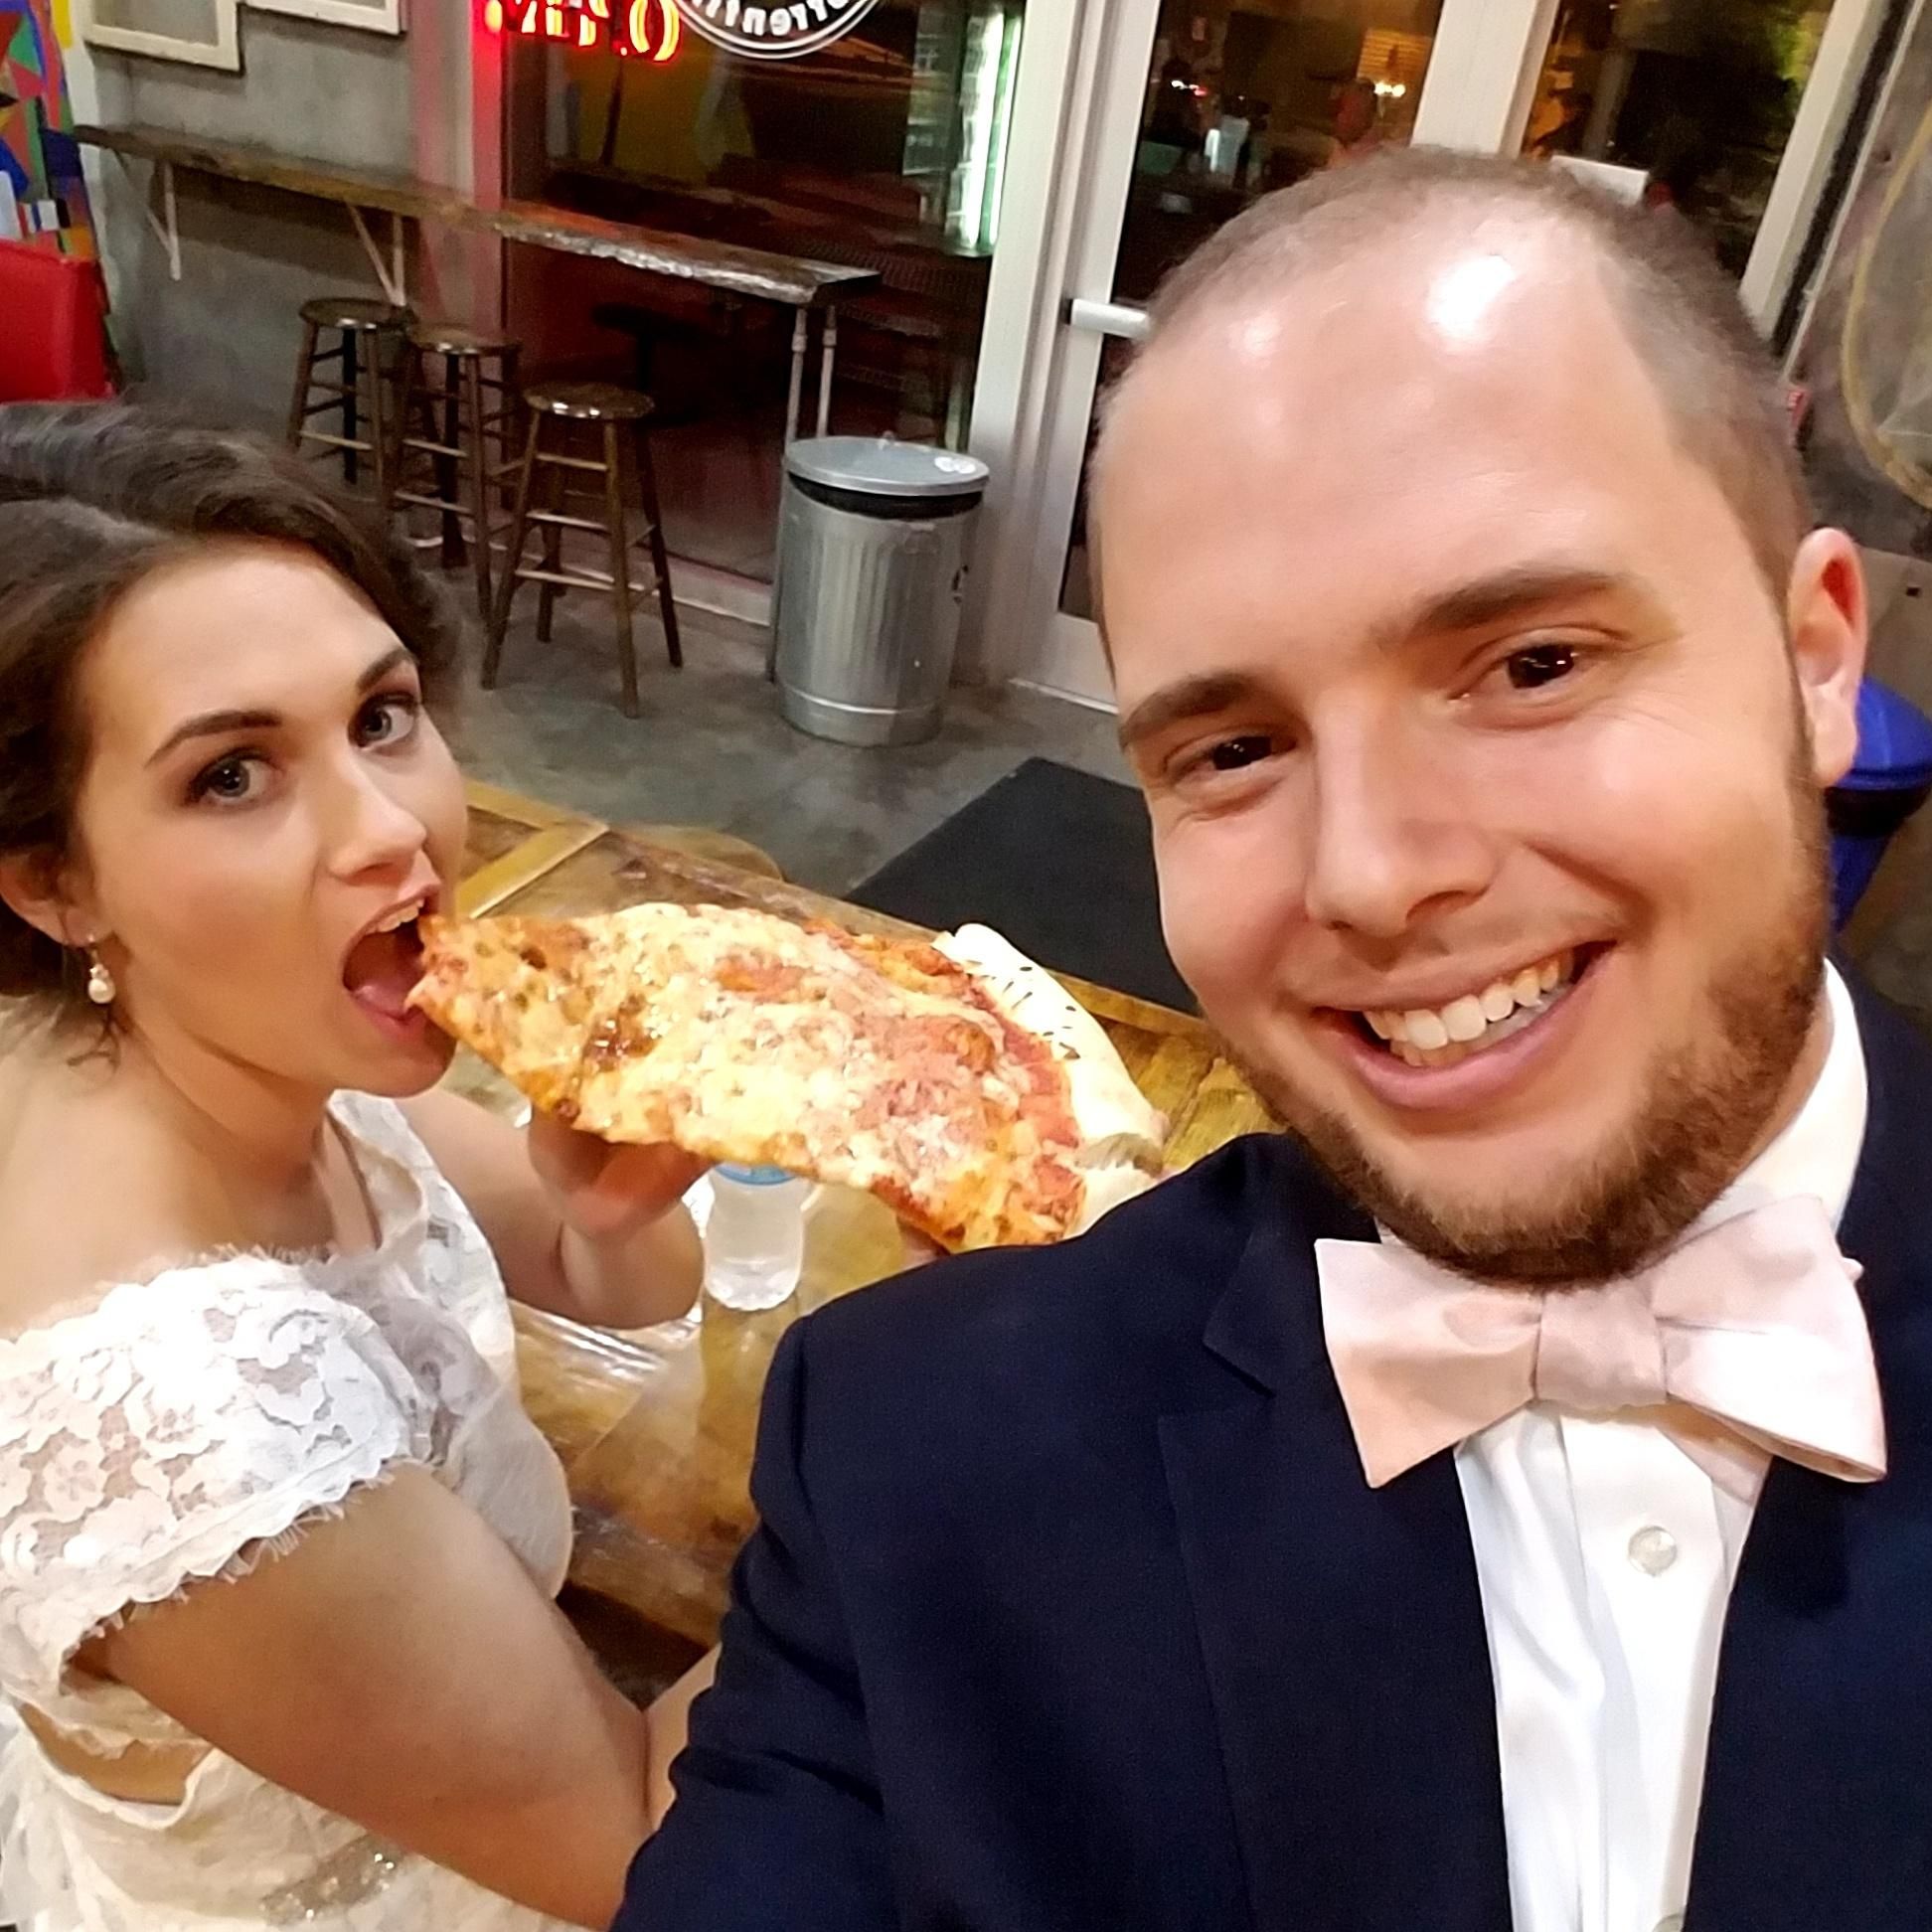 "He thinks we're here to get married, I'm just here for the pizza"